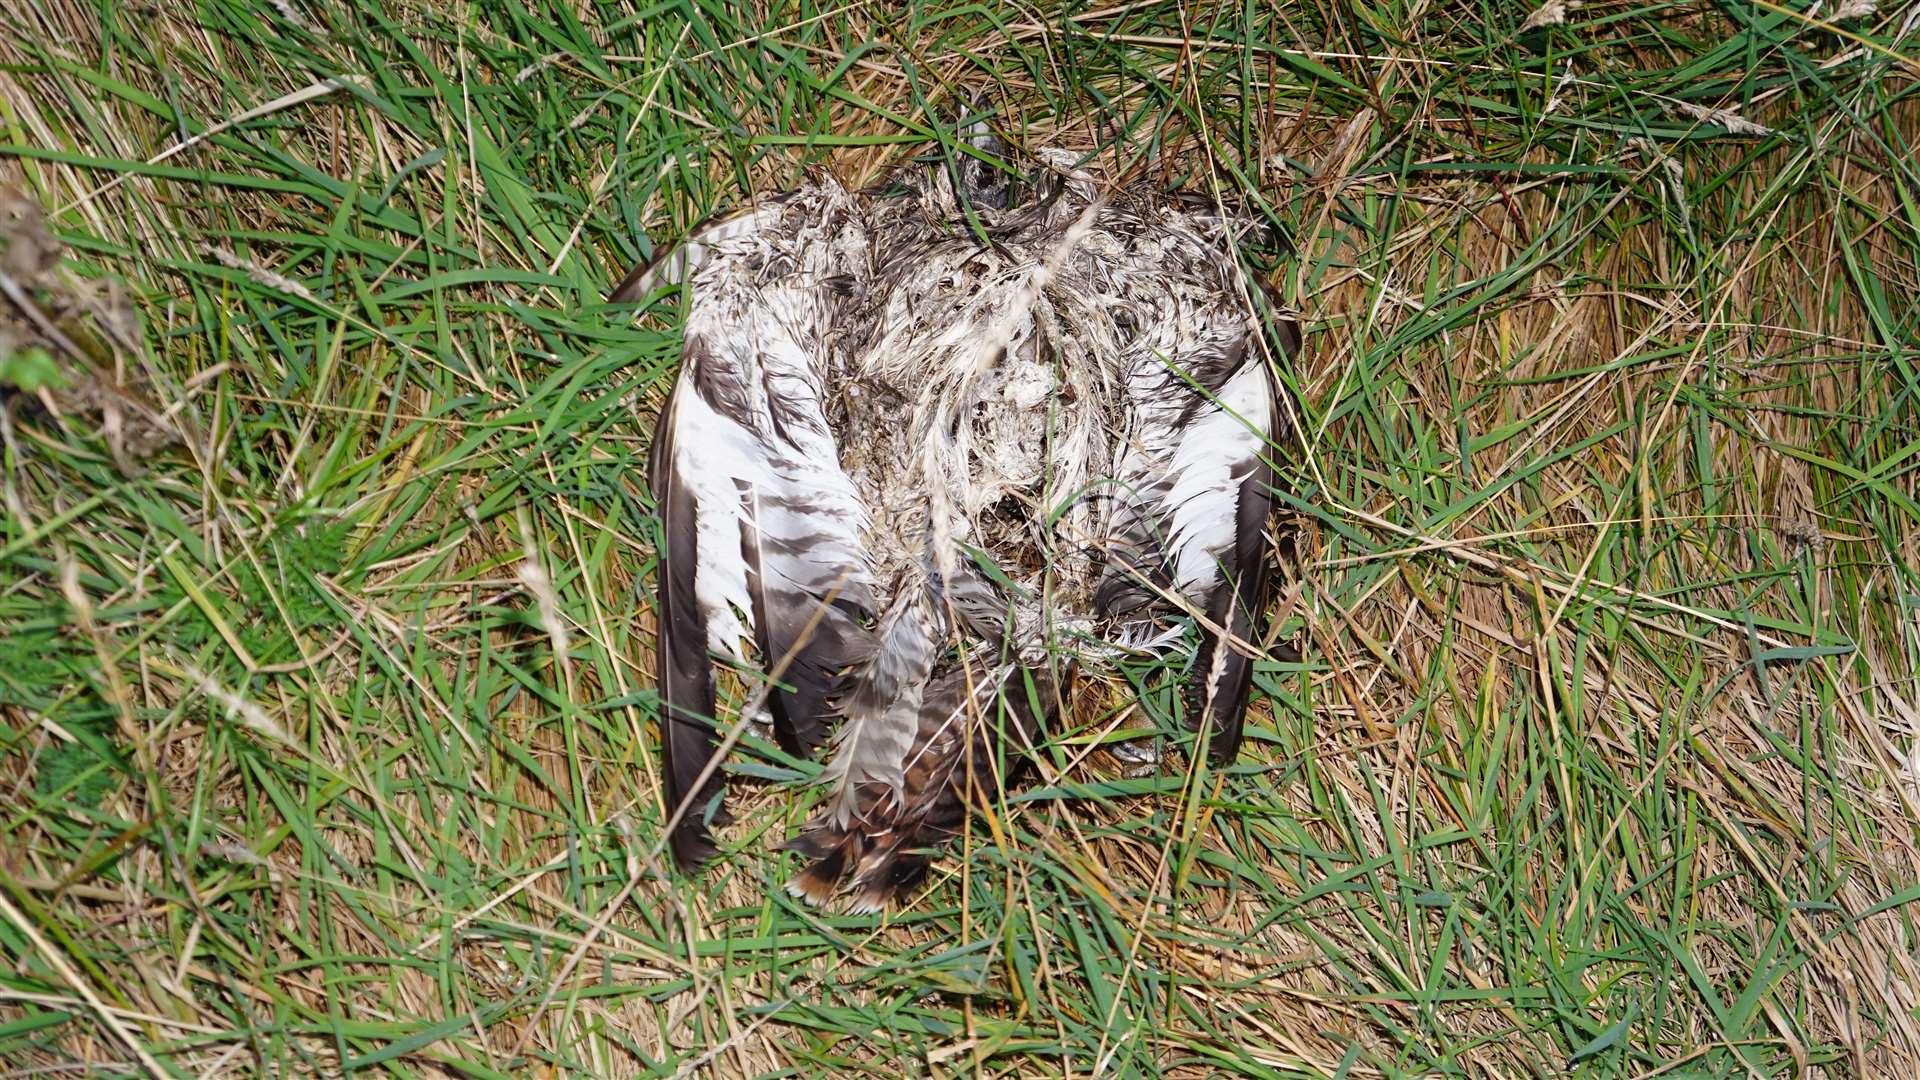 The public is advised to report finds of dead birds. Picture: DGS